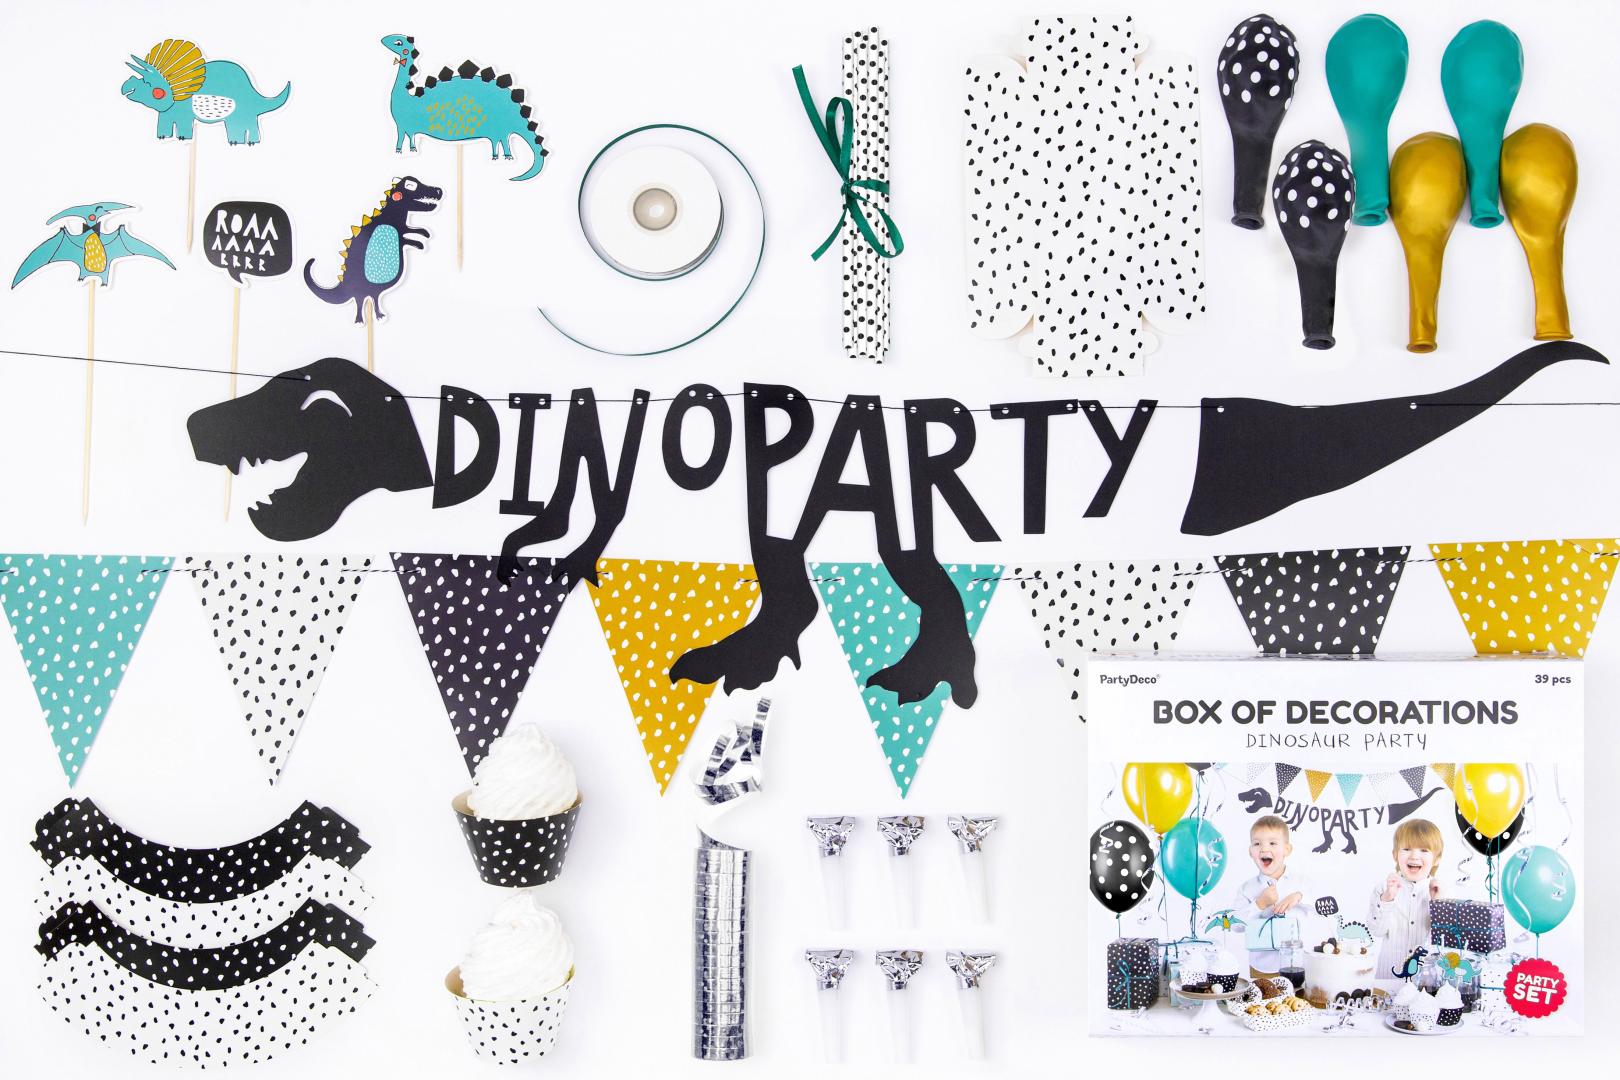  party set - PARTYDECO